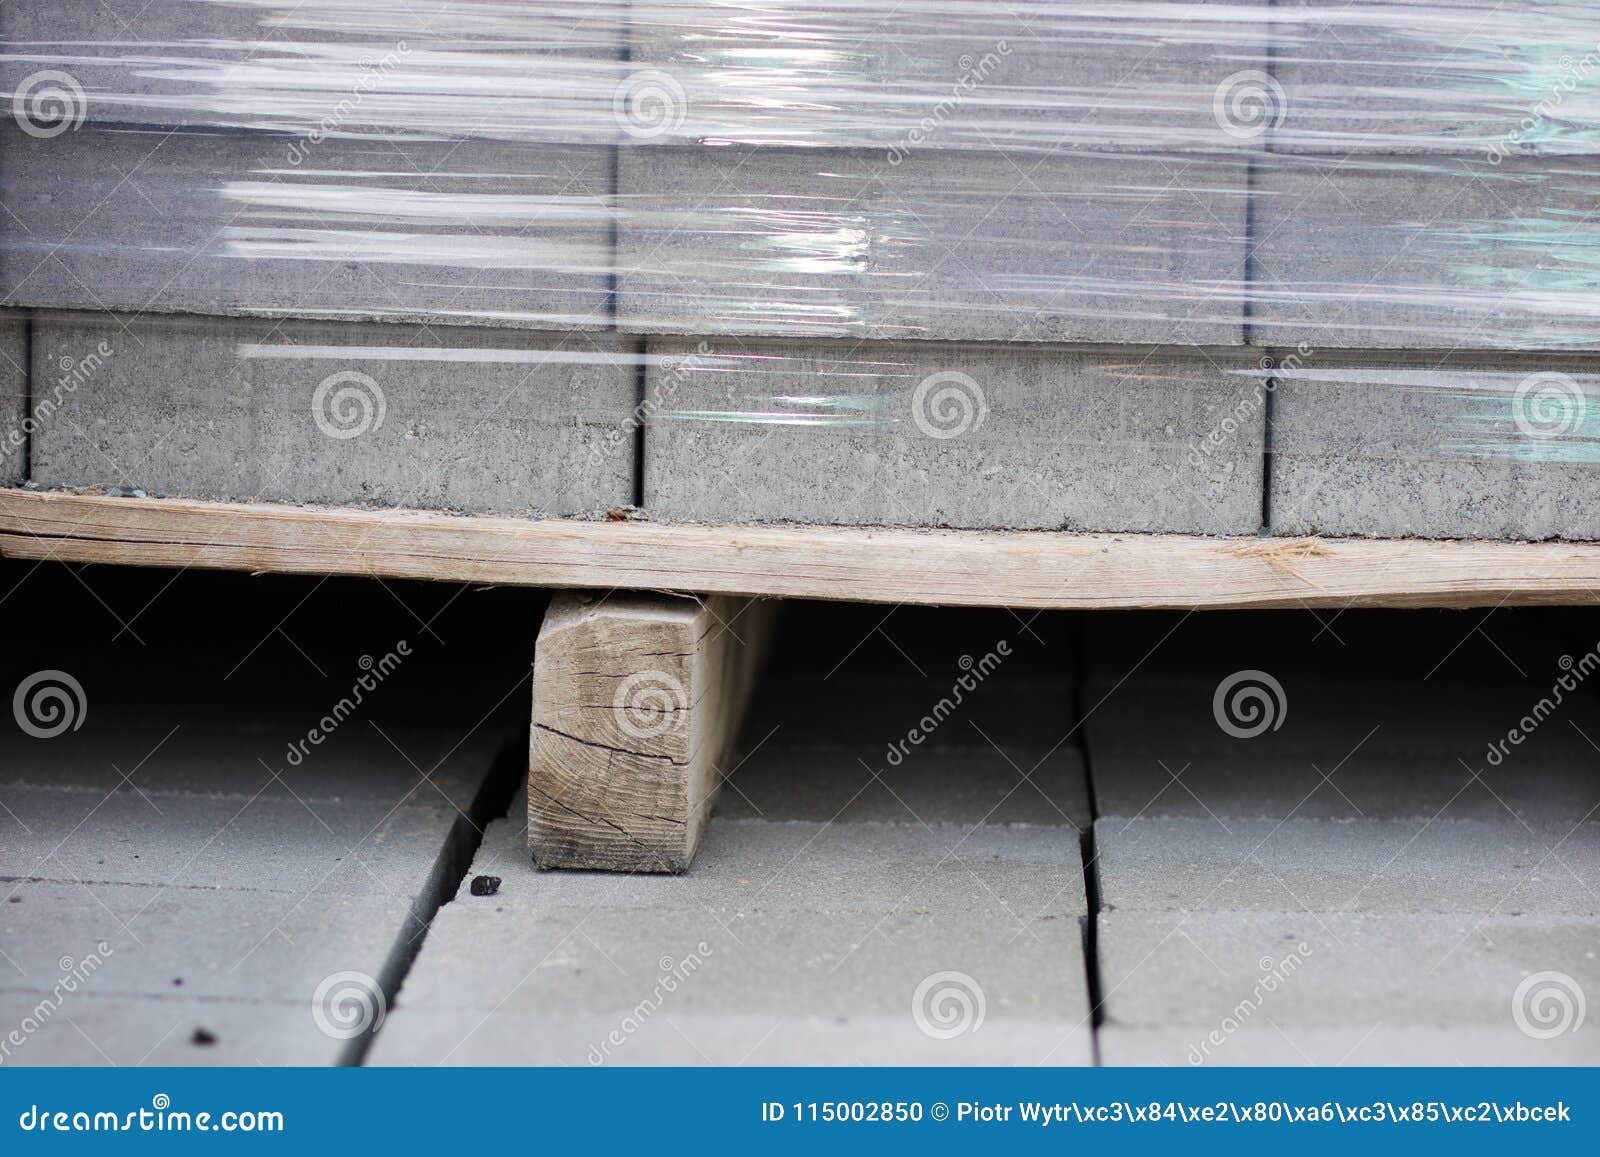 Concrete Block Used In Construction. Building Materials For Pave Stock